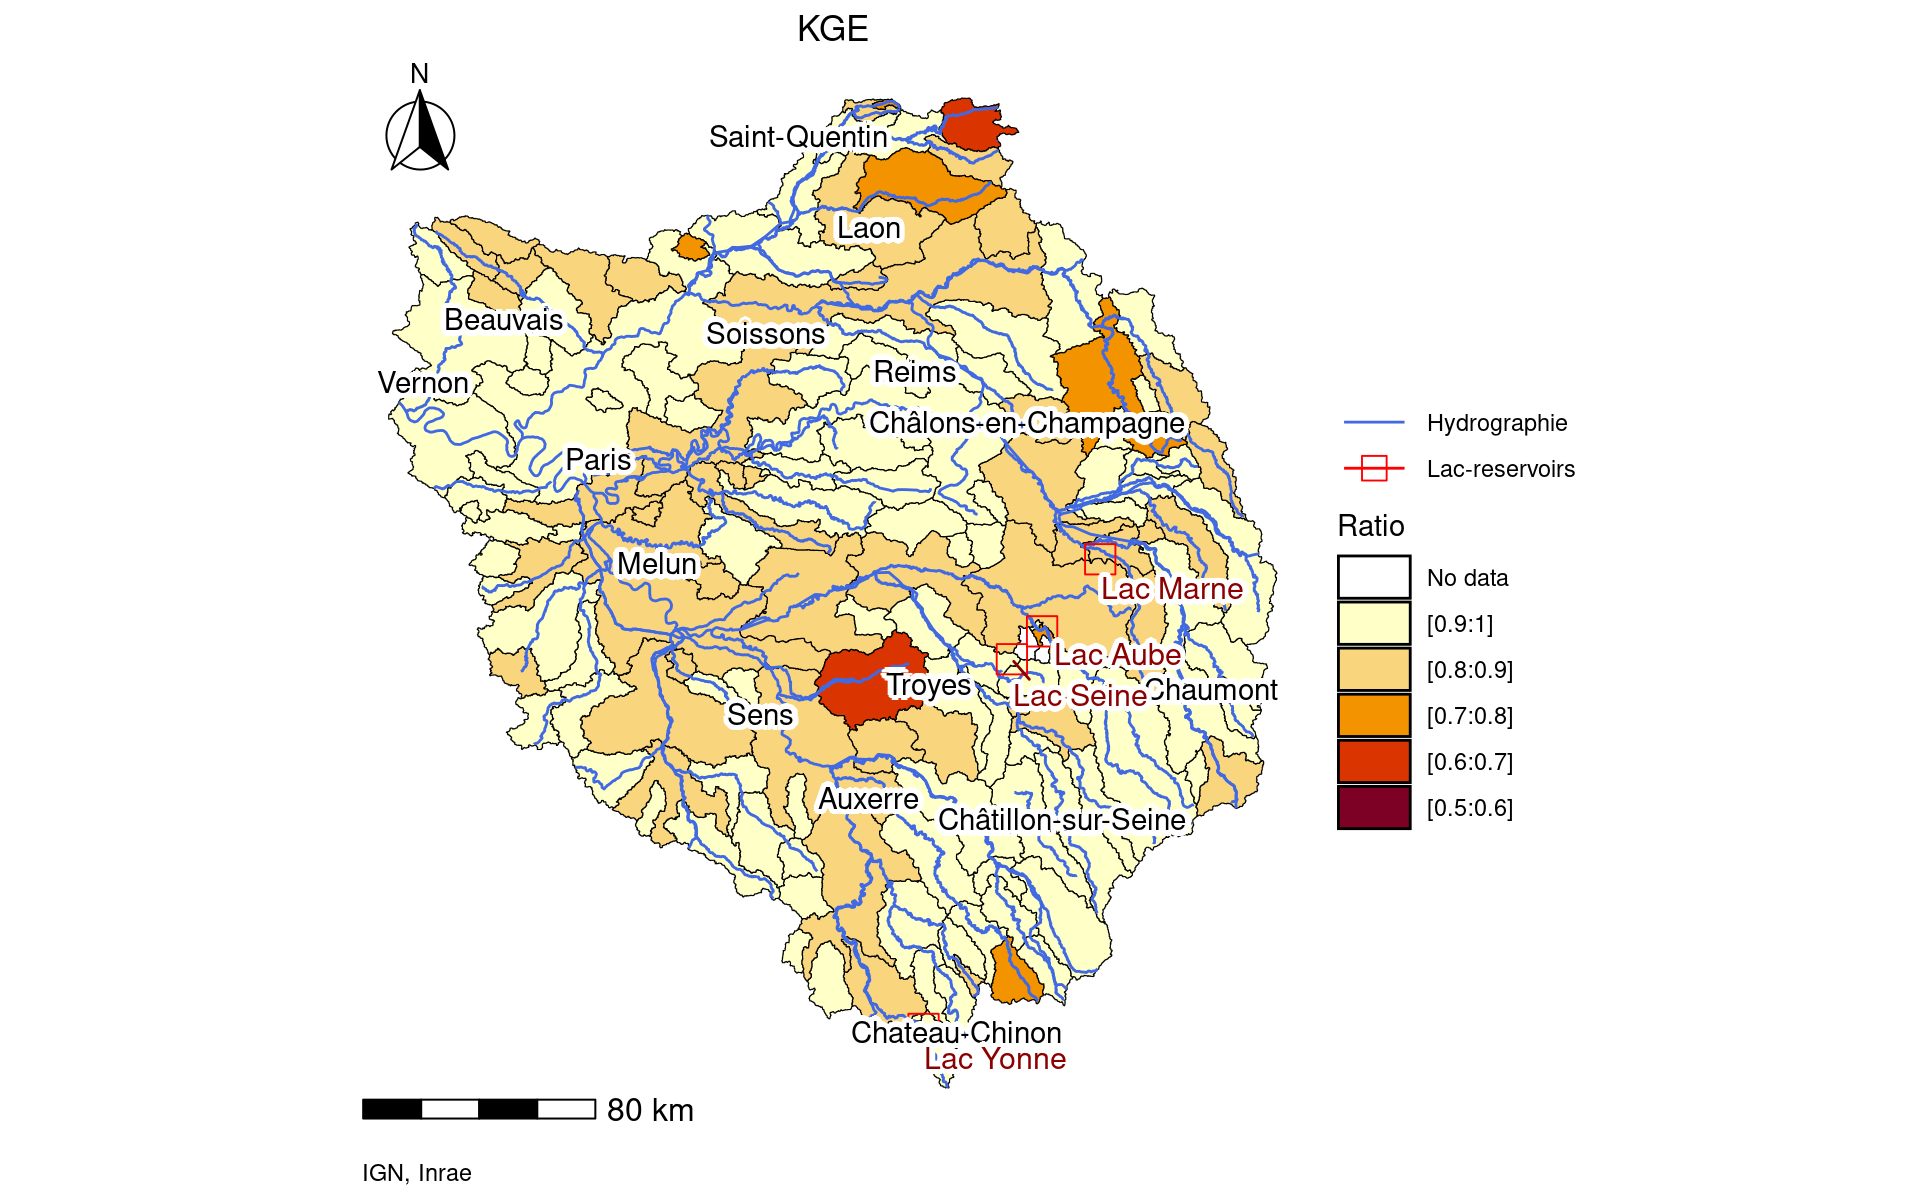 Maps of KGE criteria for calibration with the integration of the influence of reservoirs